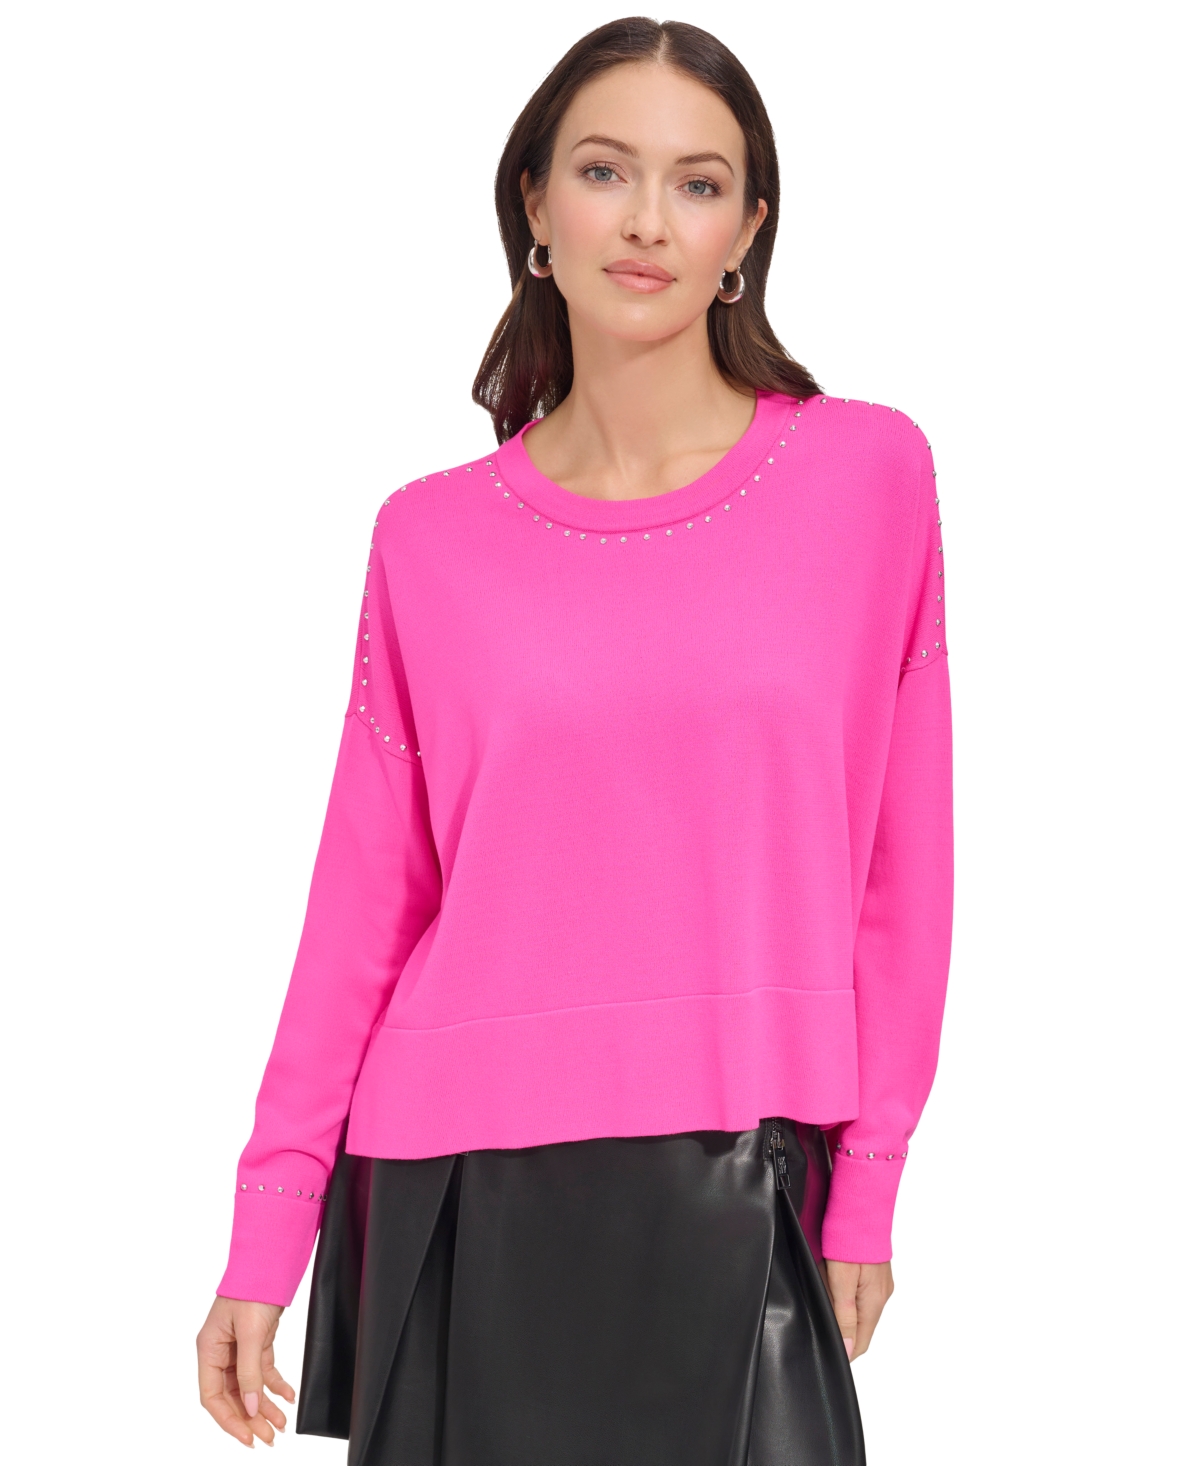 Dkny Studded Sweater In Shocking Pink